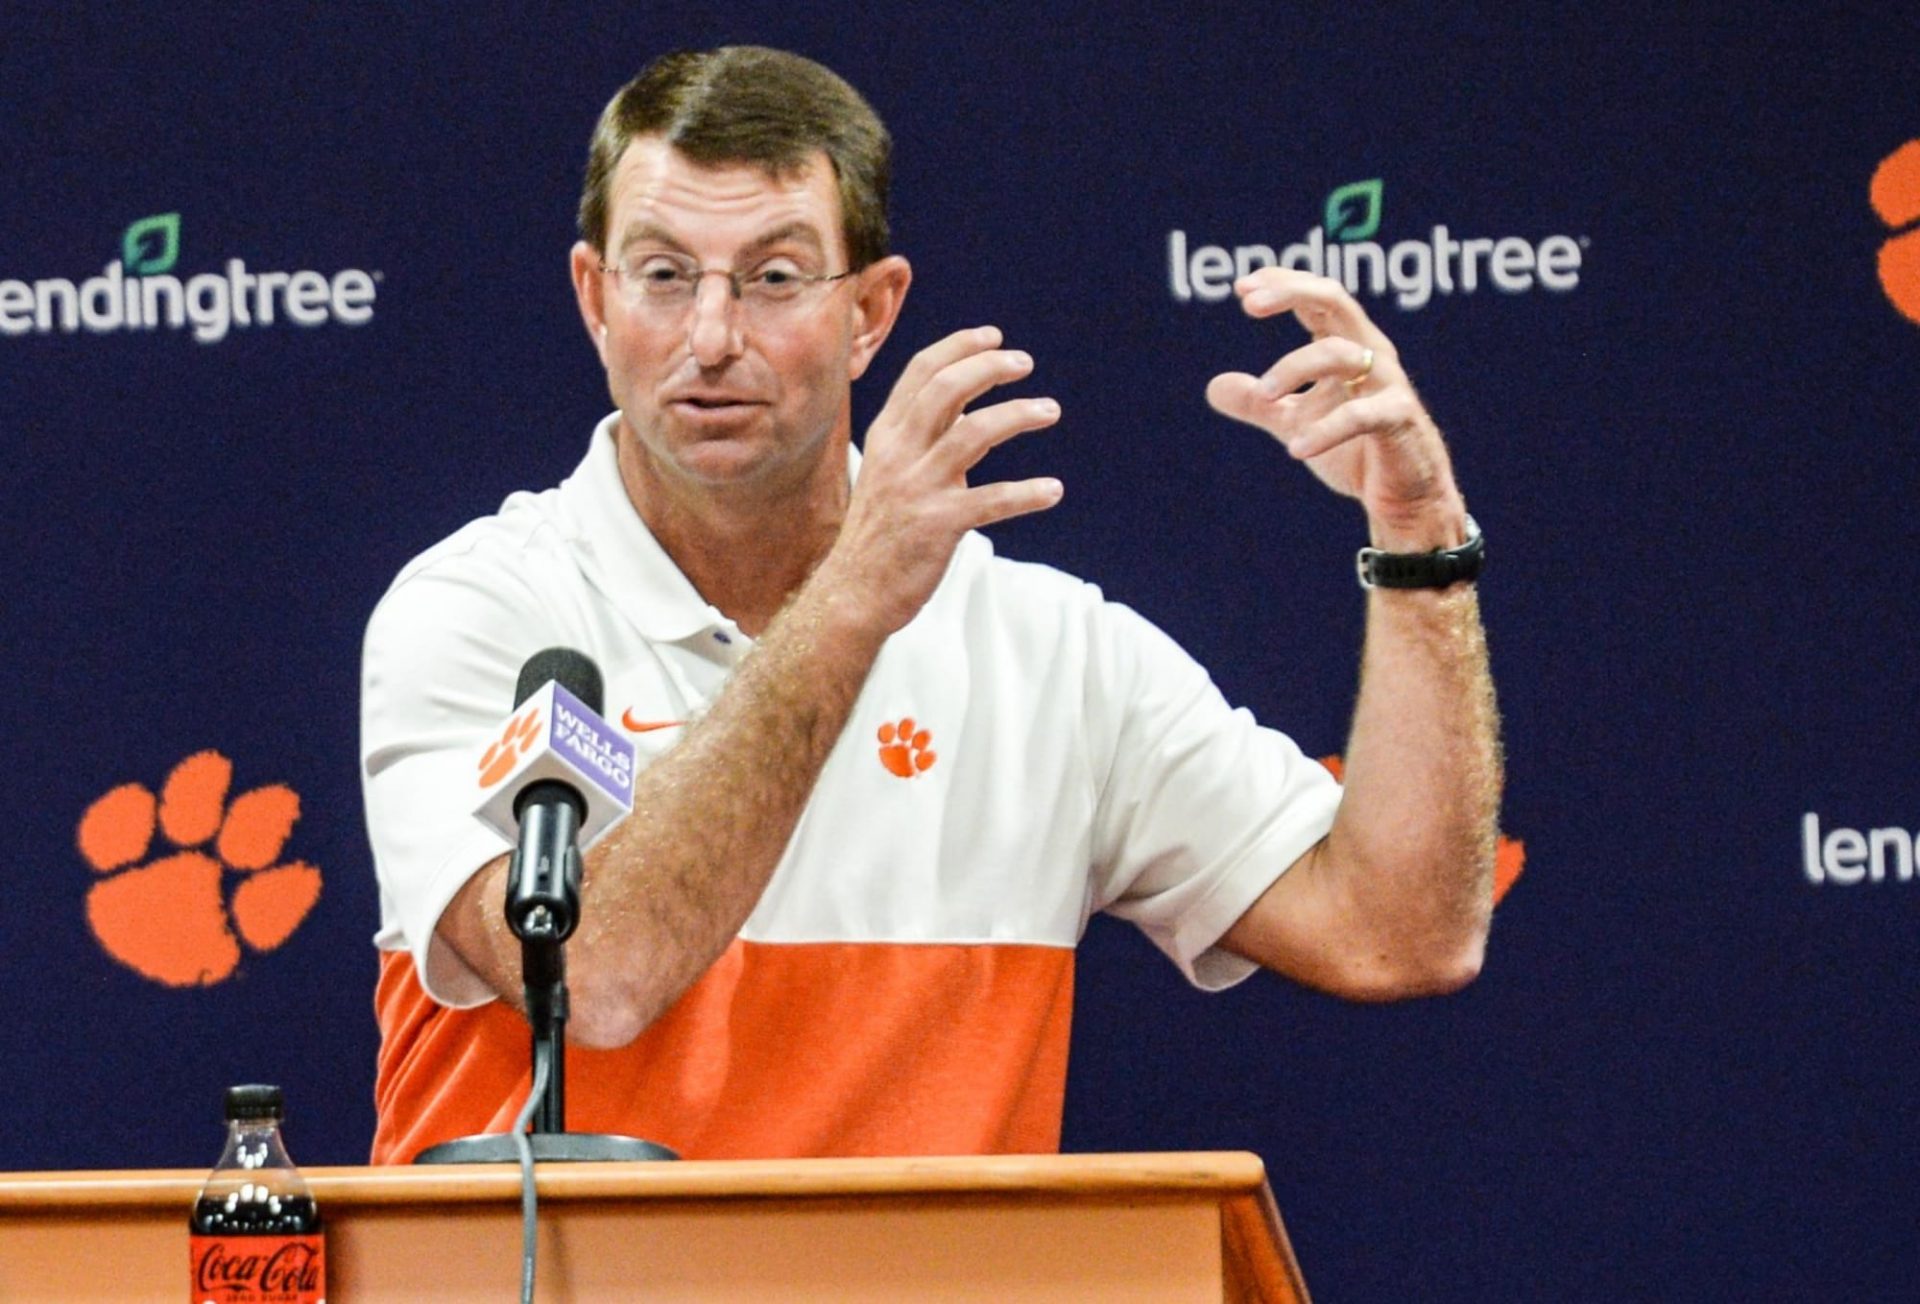 LSU message boards are delusional, overjoyed Dabo Swinney would possibly per chance replace Ed Orgeron